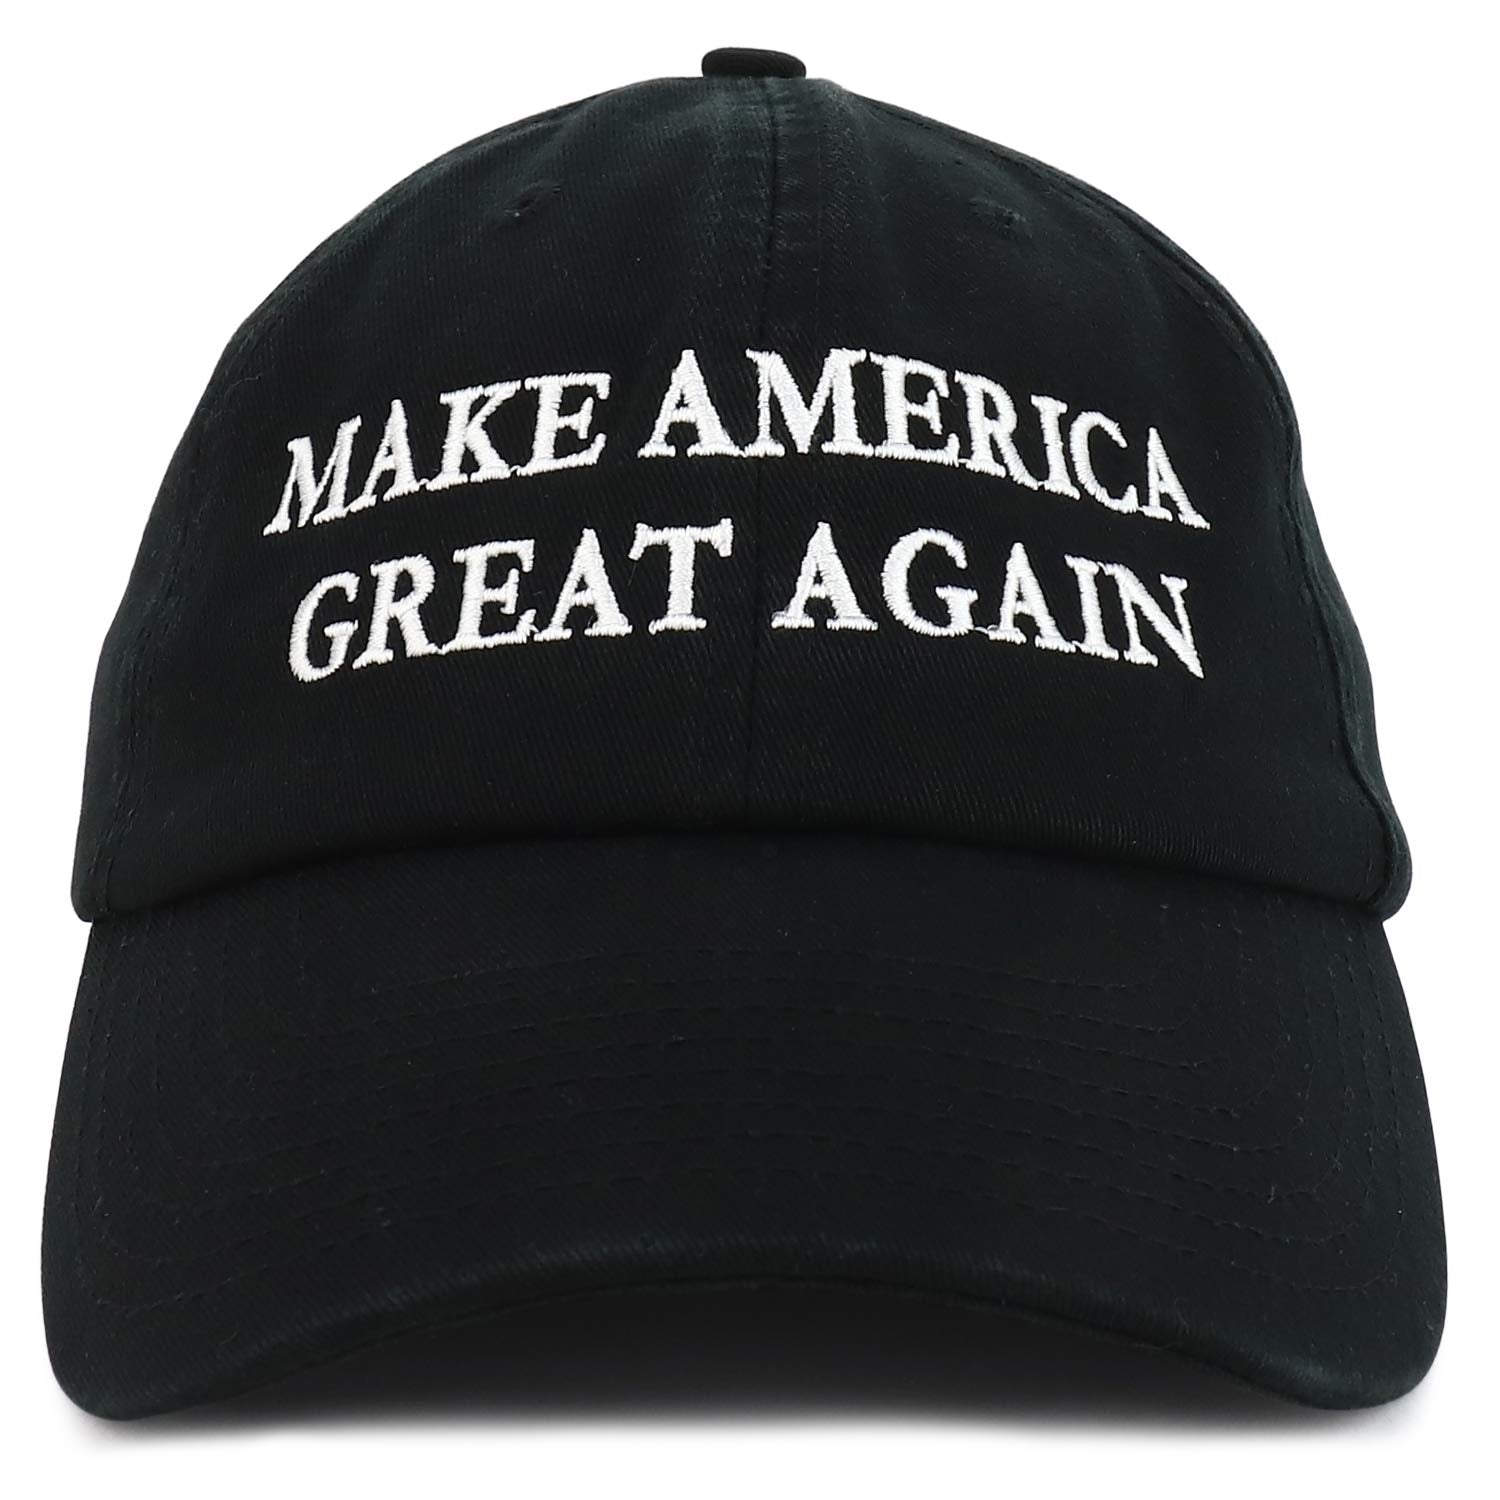 Made in USA Donald Trump Soft Cotton Cap - Make America Great Again Embroidered - Black